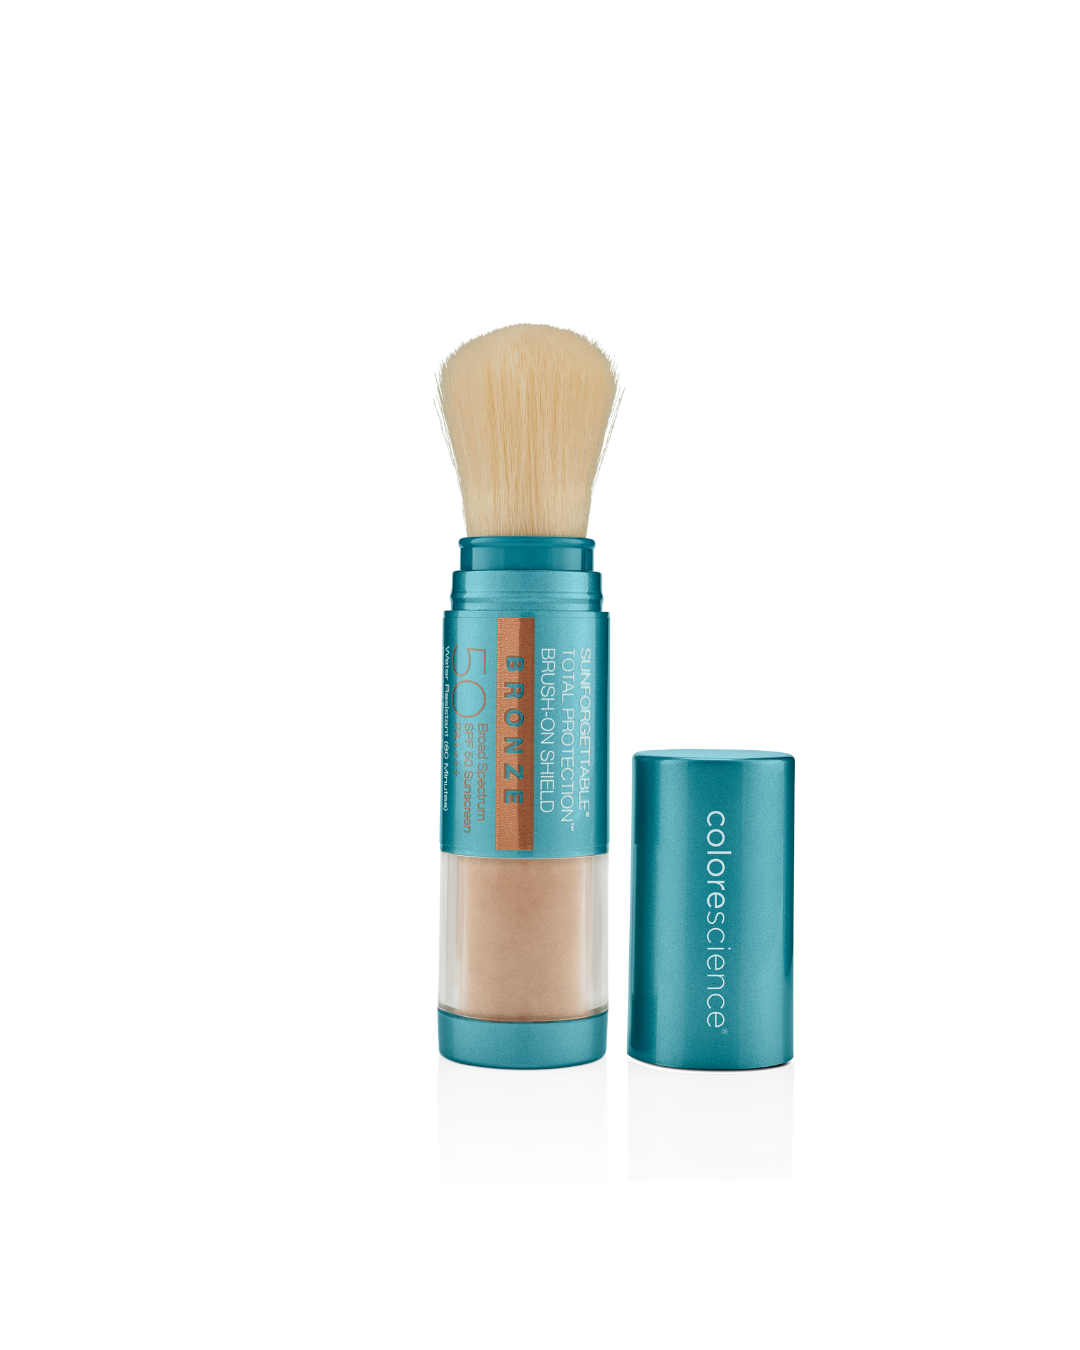 Colorescience Sunforgettable Total Protection Brush-On Shield Bronze SPF 50